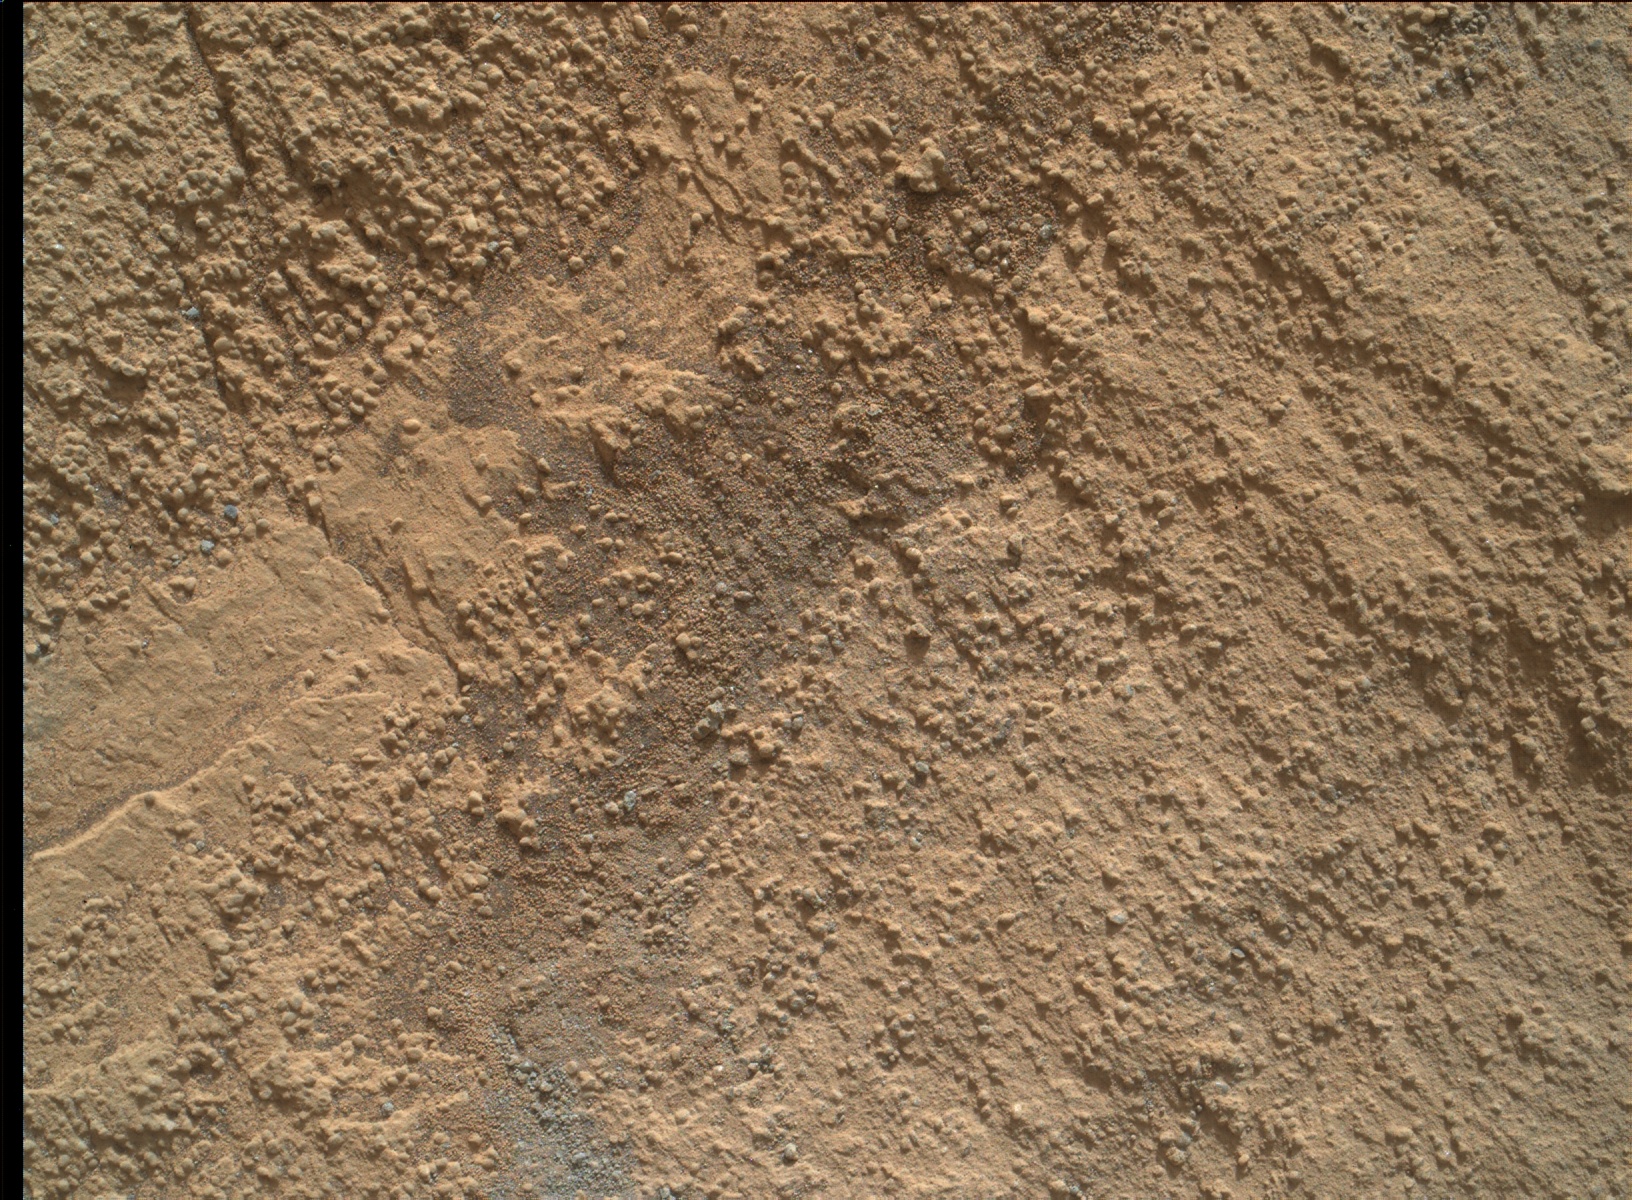 Nasa's Mars rover Curiosity acquired this image using its Mars Hand Lens Imager (MAHLI) on Sol 1341